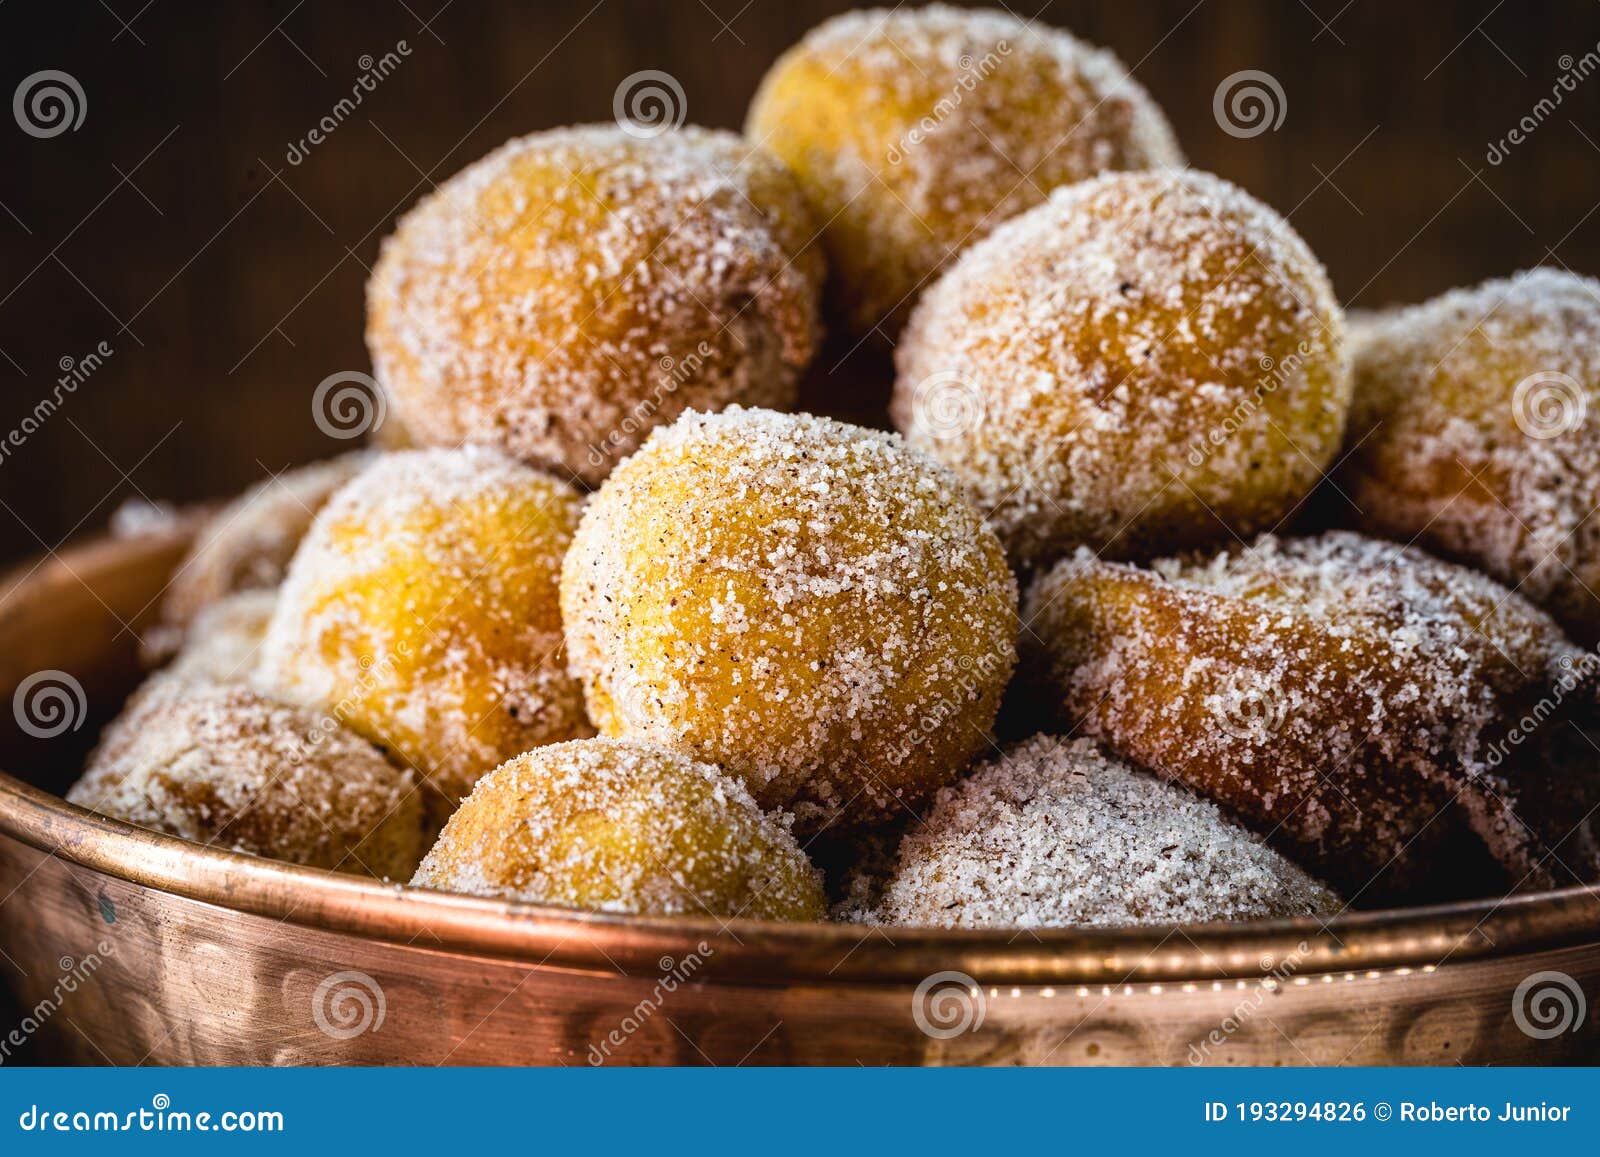 brazilian sweet called bolinho de chuva, made with cinnamon, refined and fried sugar. food served in a copper pot, typical sweet